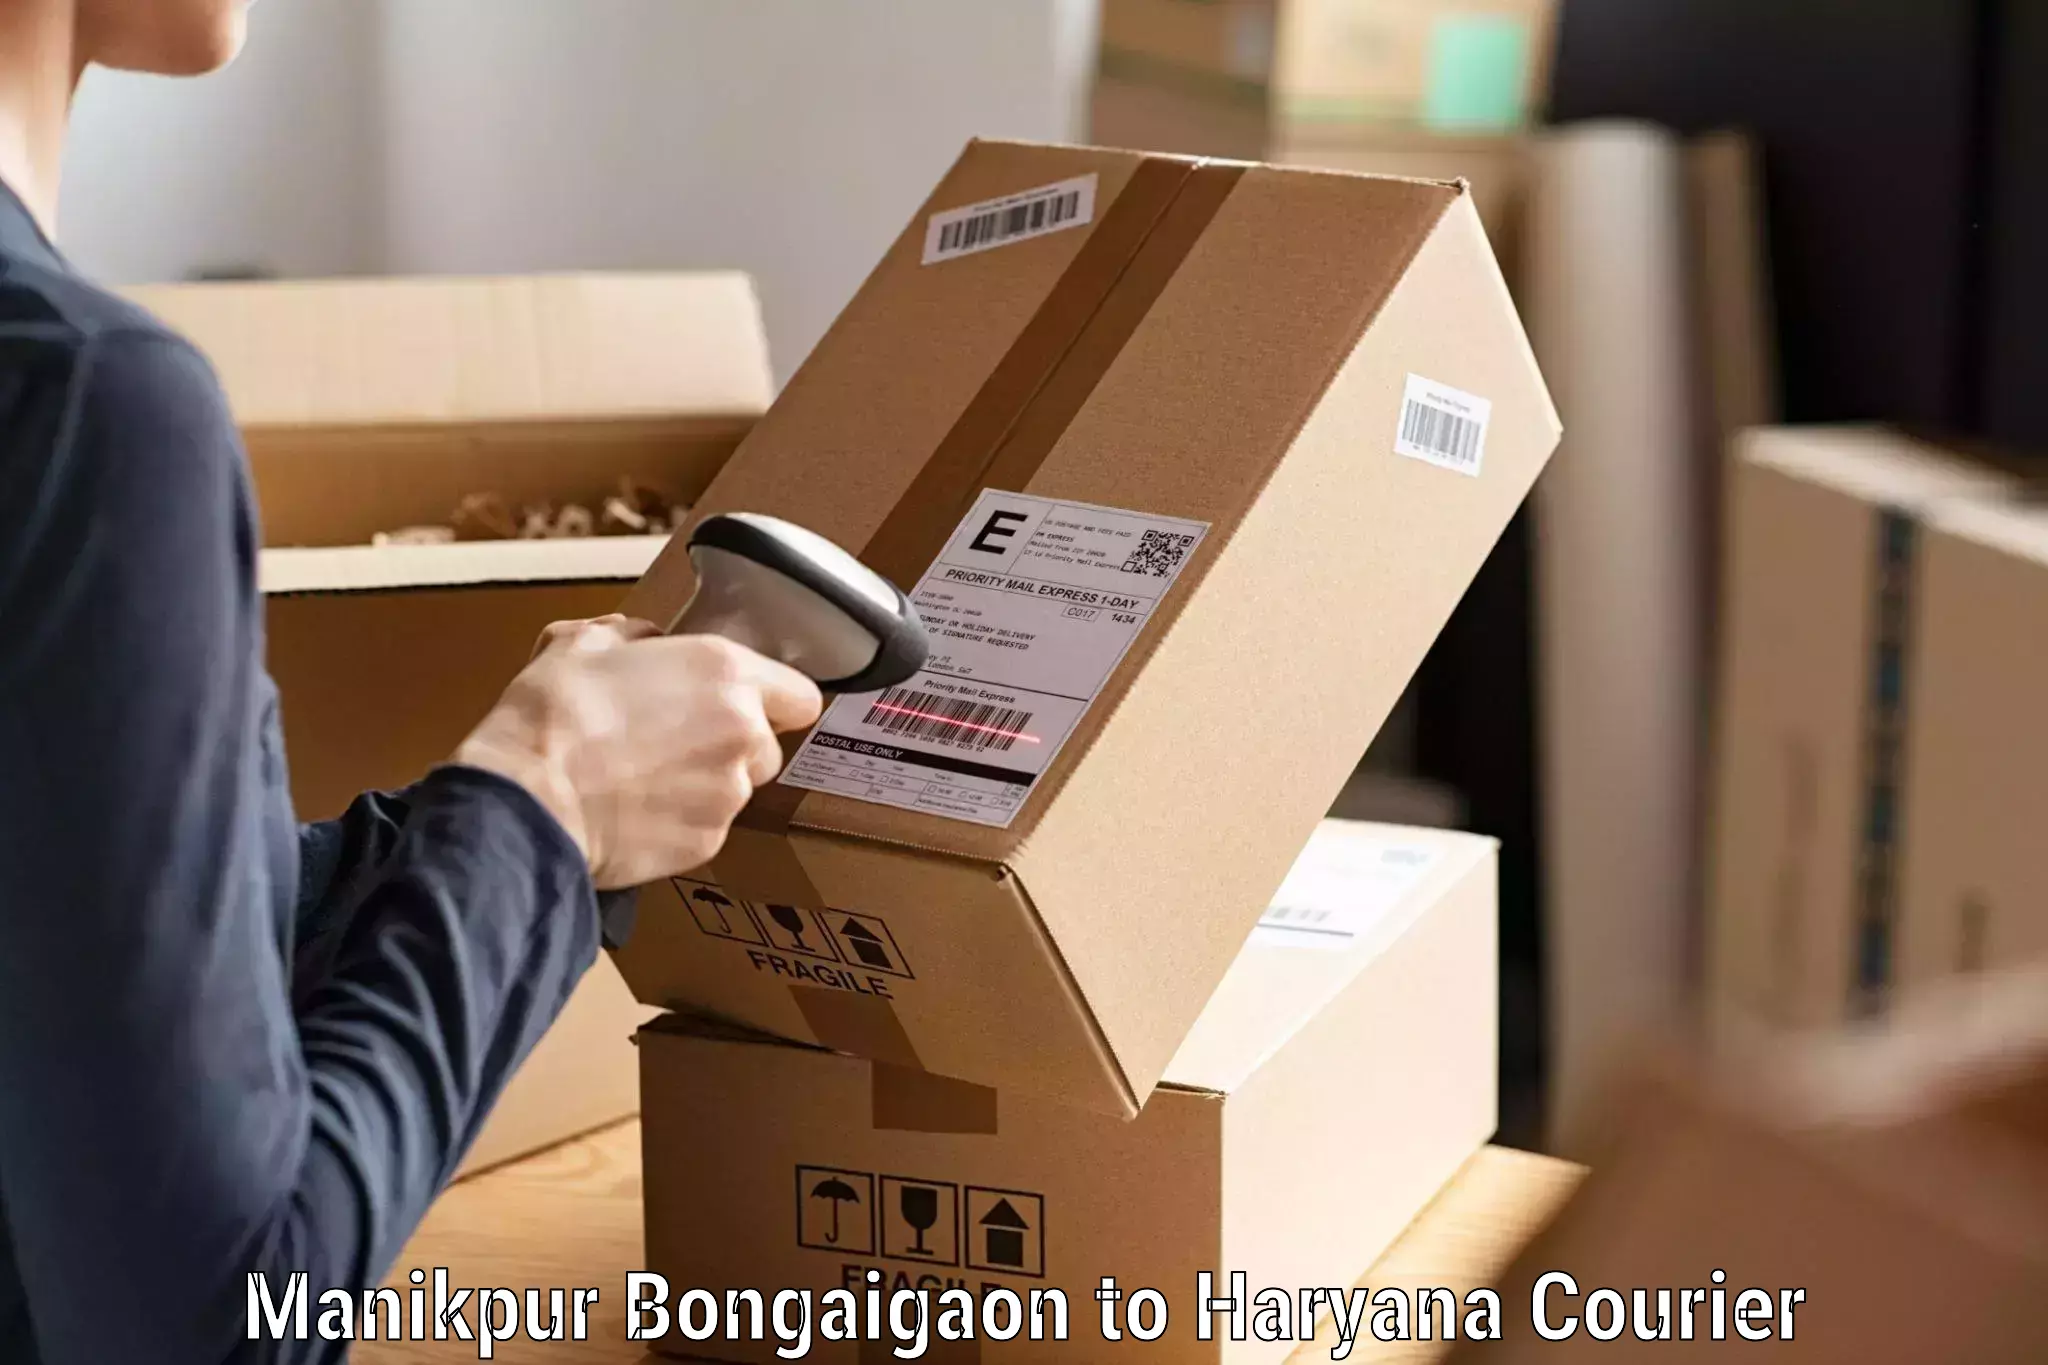 Reliable parcel services Manikpur Bongaigaon to Chirya